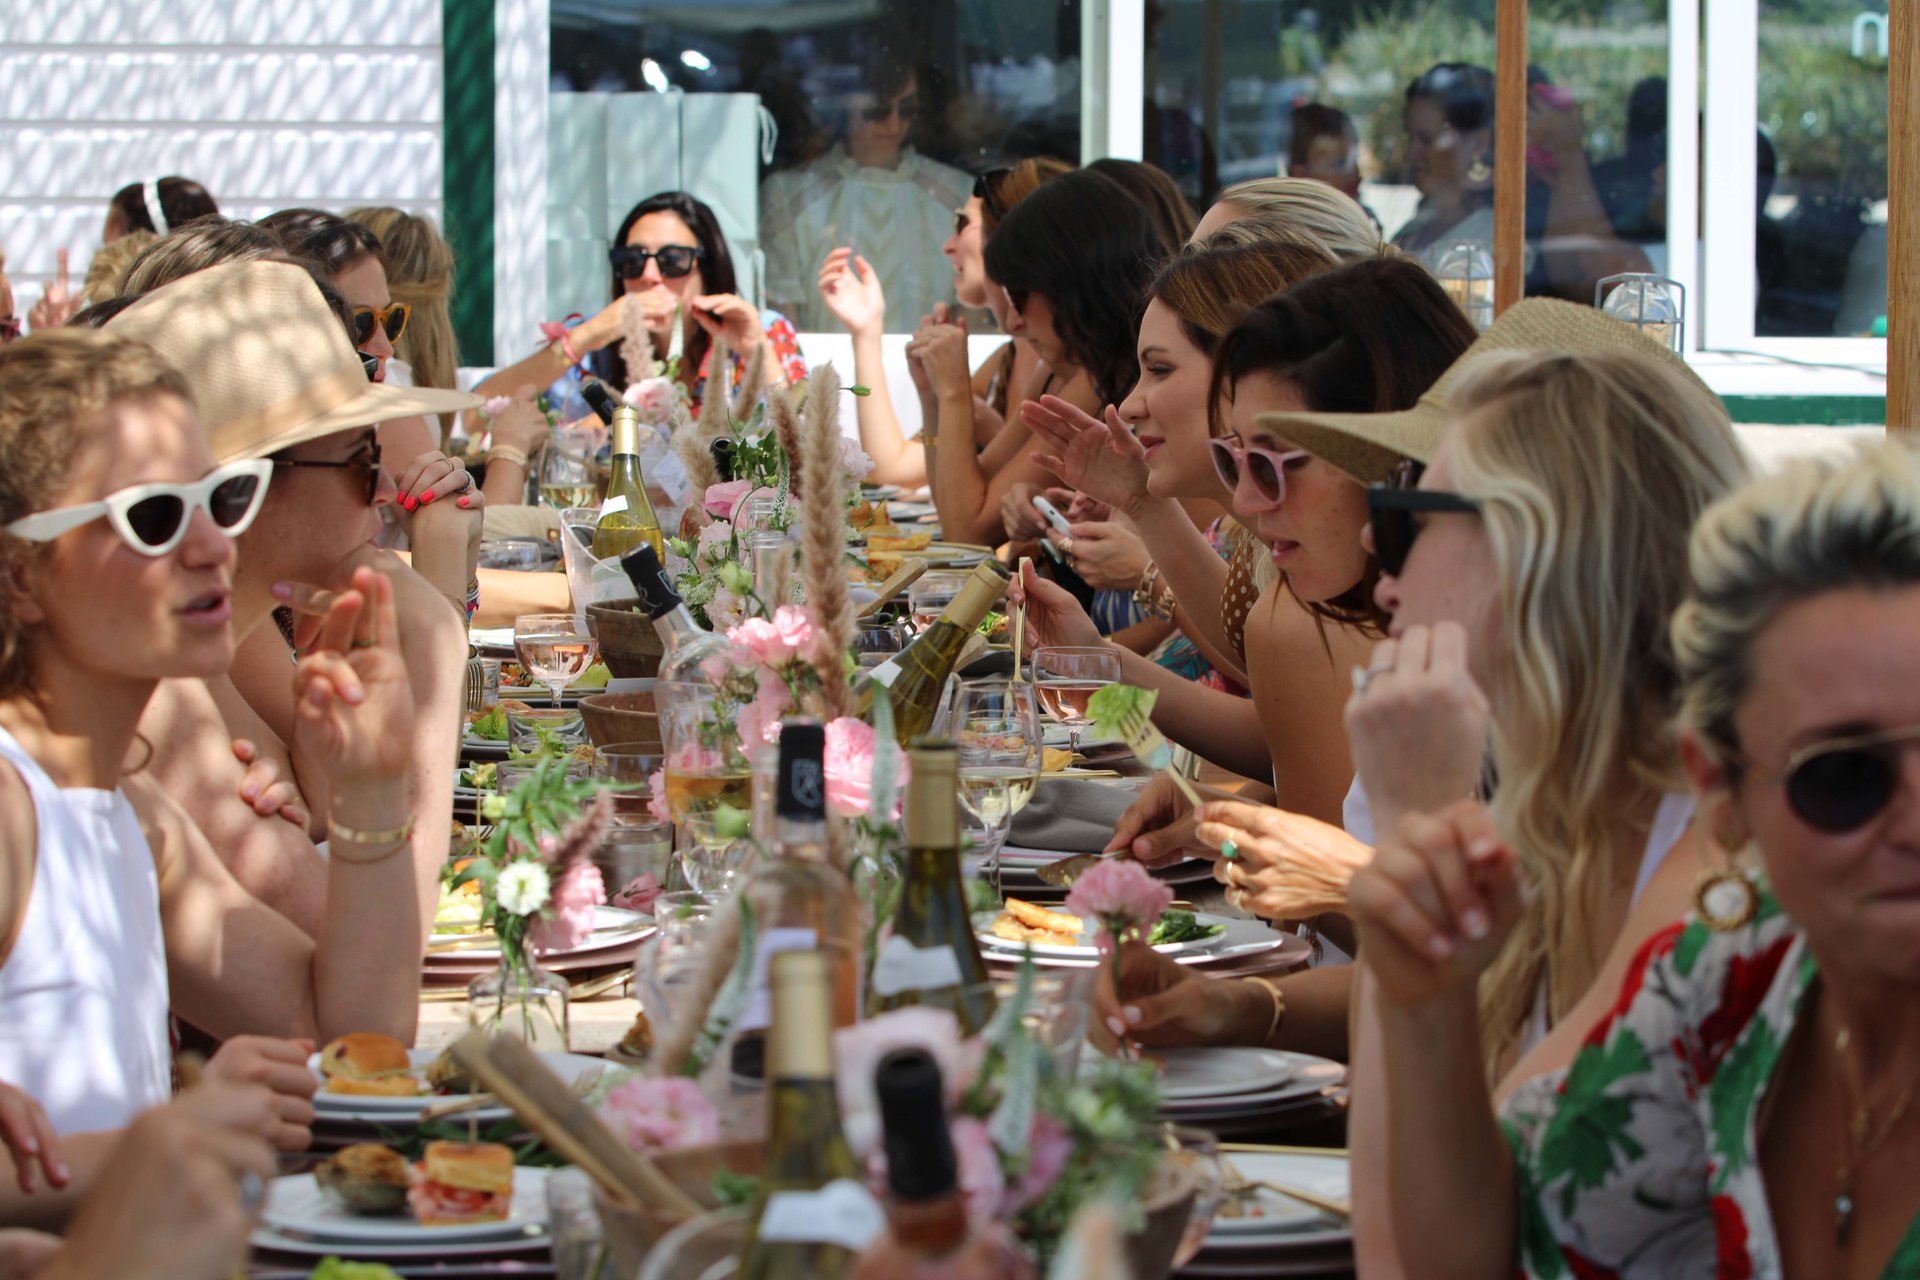 Crush Studio hit the hot spot of the summer, Montauk, to design a beautifully-scaped luncheon for Frida Mom.  